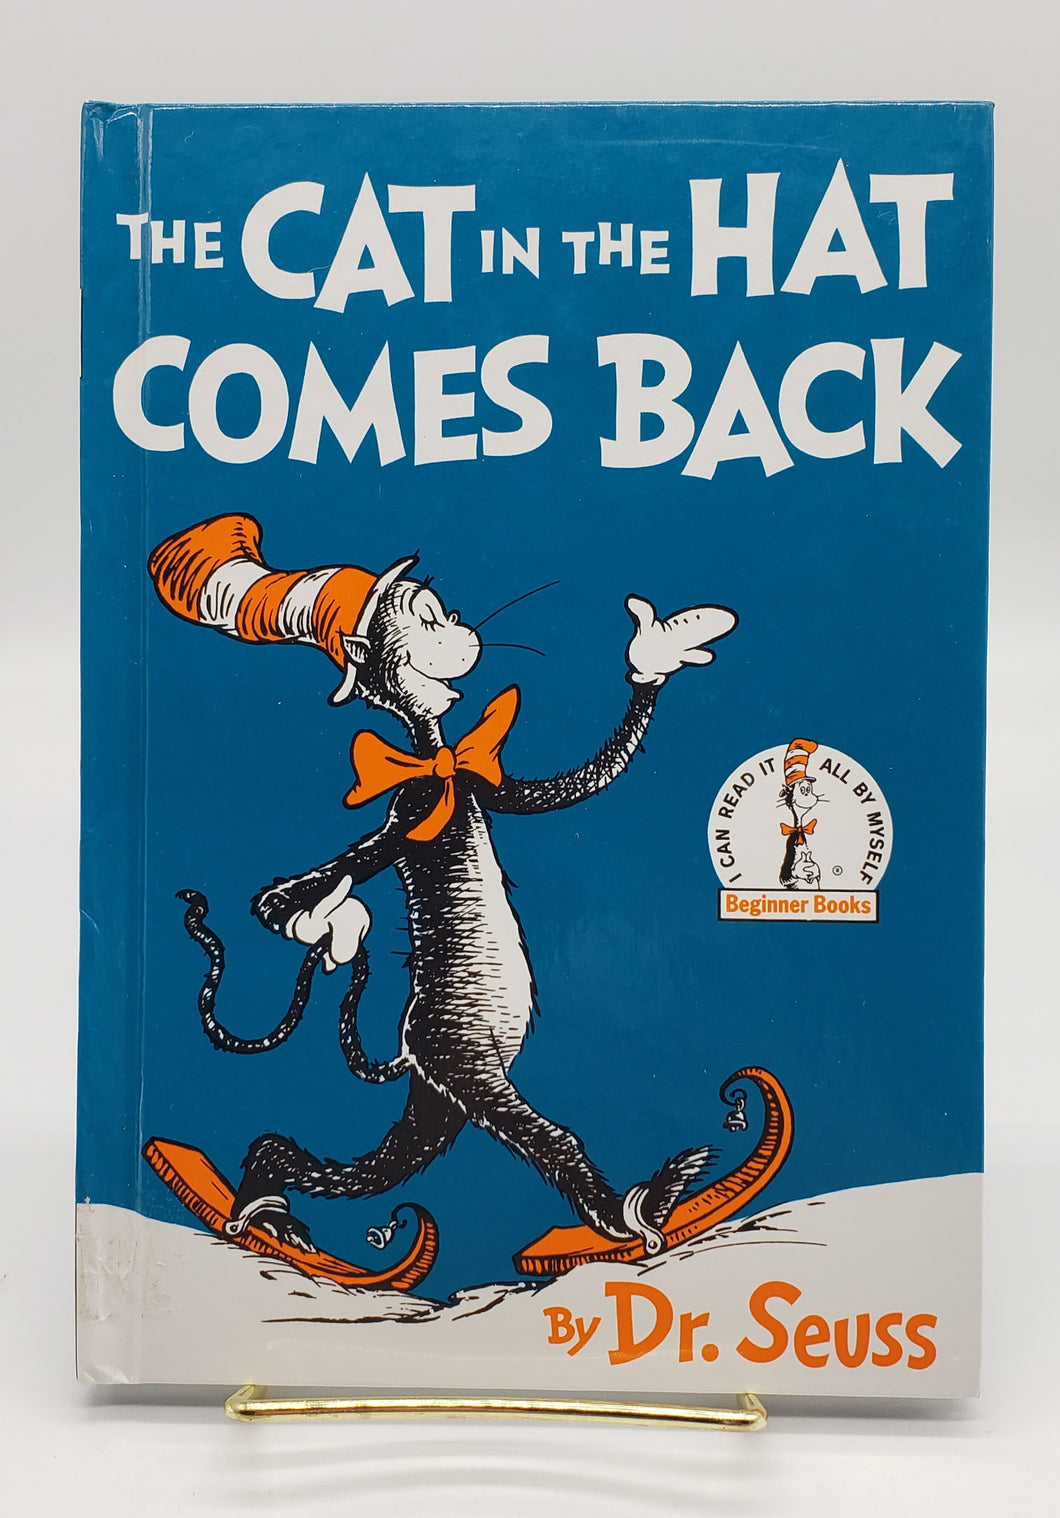 Dr Seuss - The Cat in the Hat Comes Back